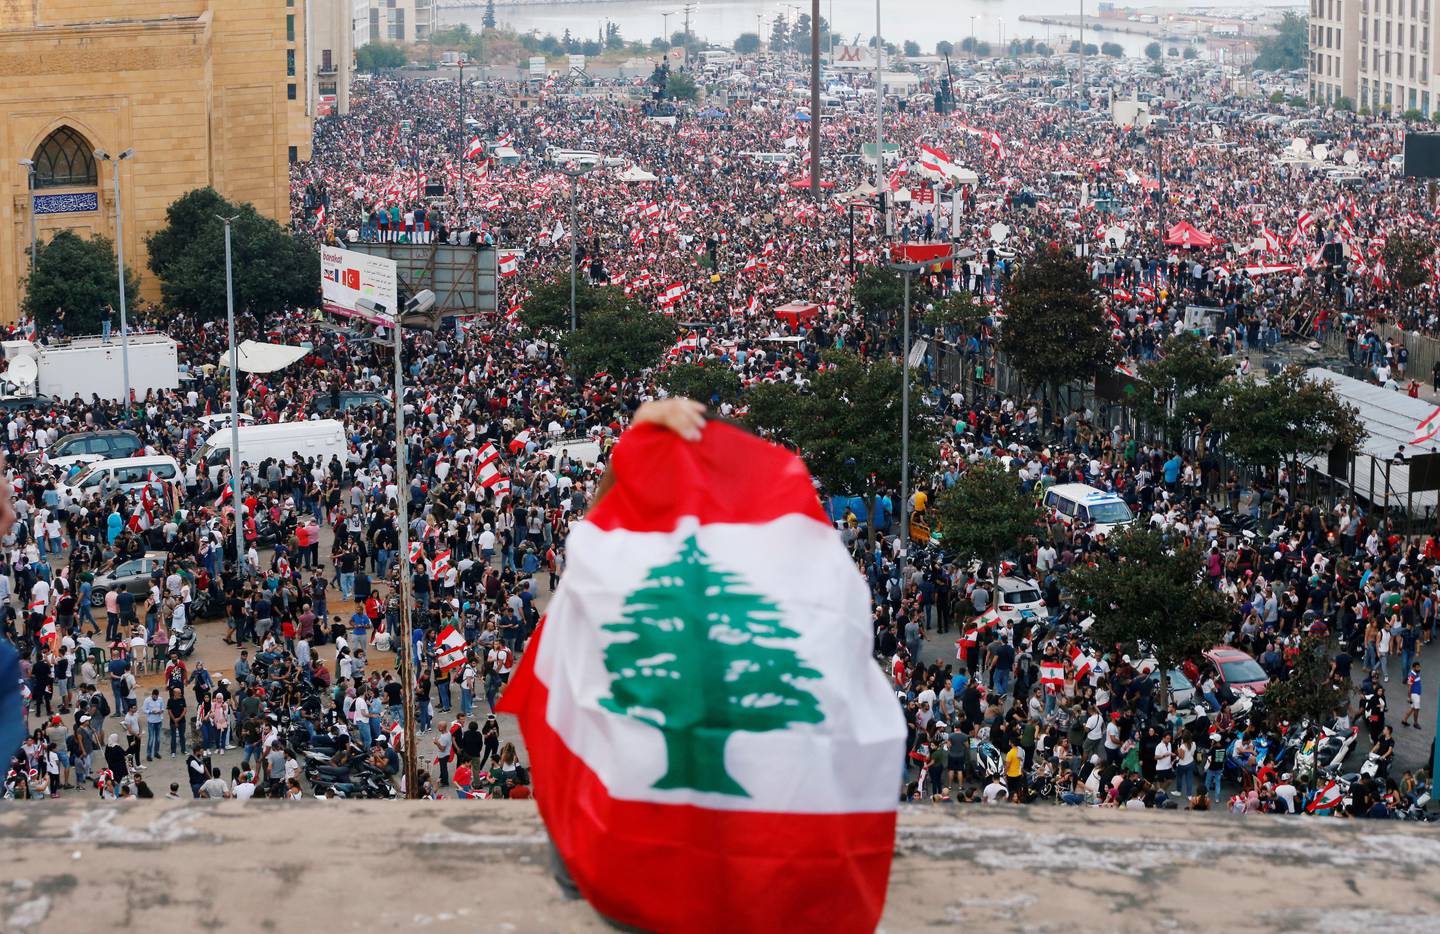 A general view of demonstrators during an anti-government protest in downtown Beirut, Lebanon October 20, 2019. REUTERS/Mohamed Azakir     TPX IMAGES OF THE DAY